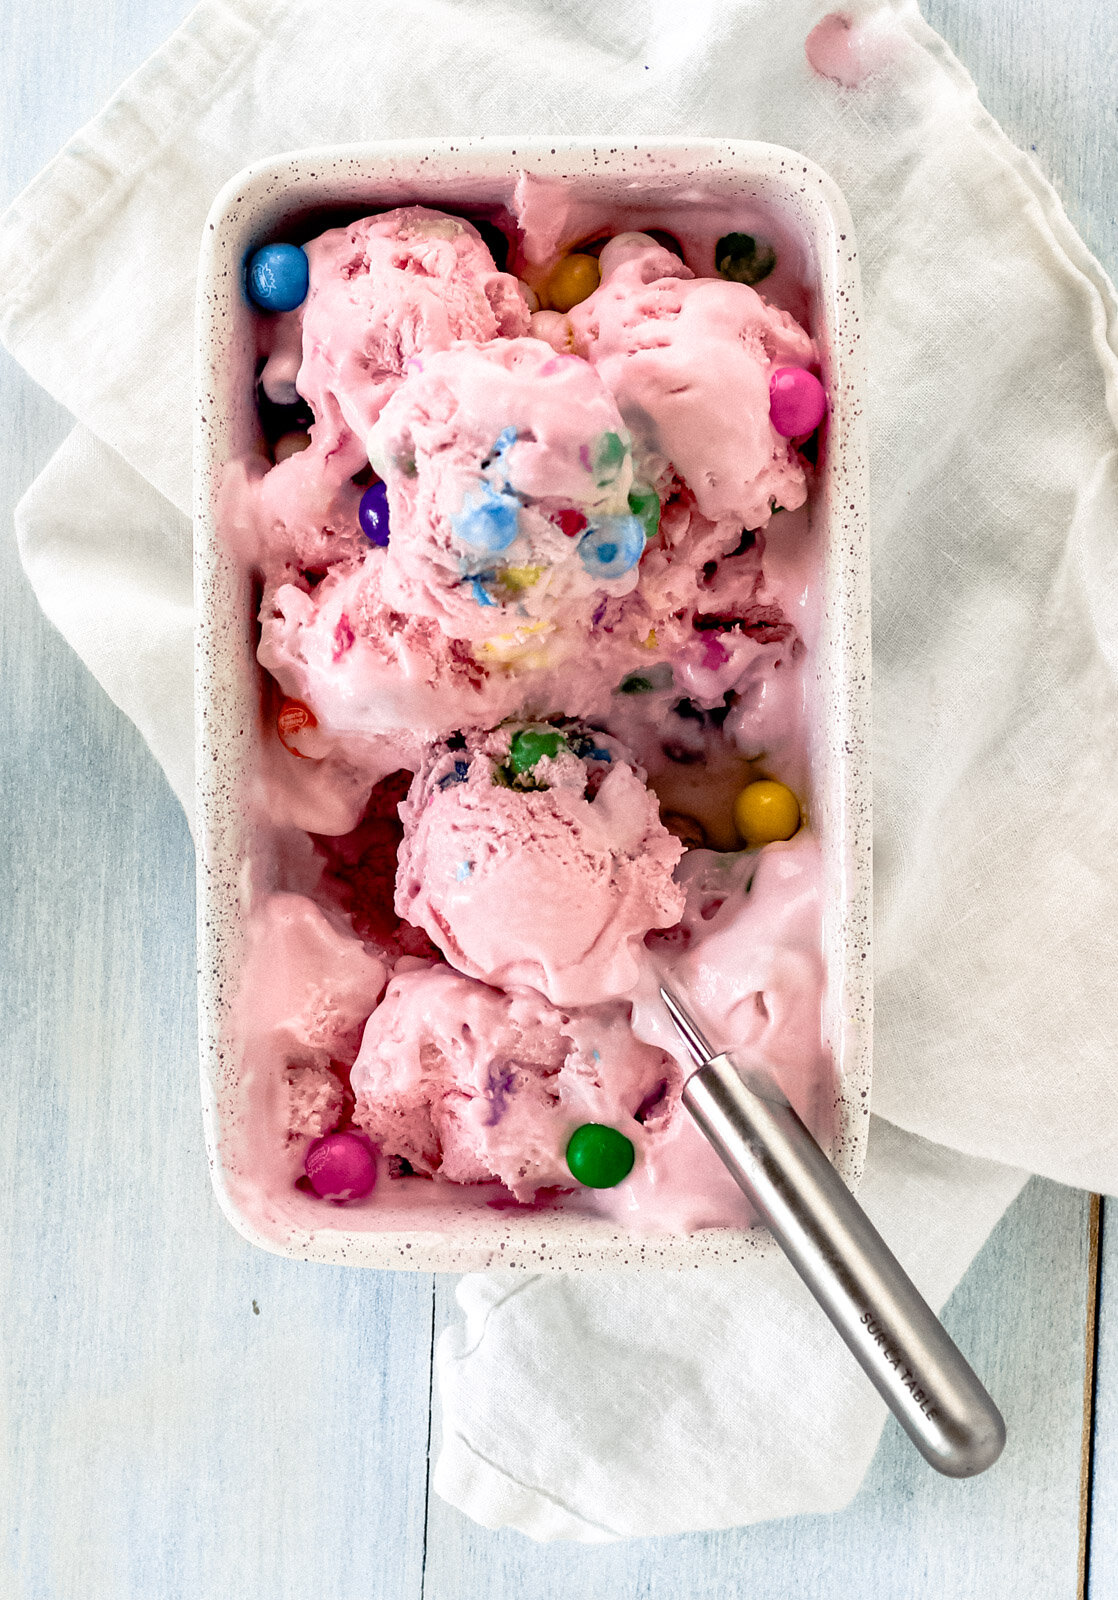 a pink bubblegum ice cream recipe is scooped into a rectangular container